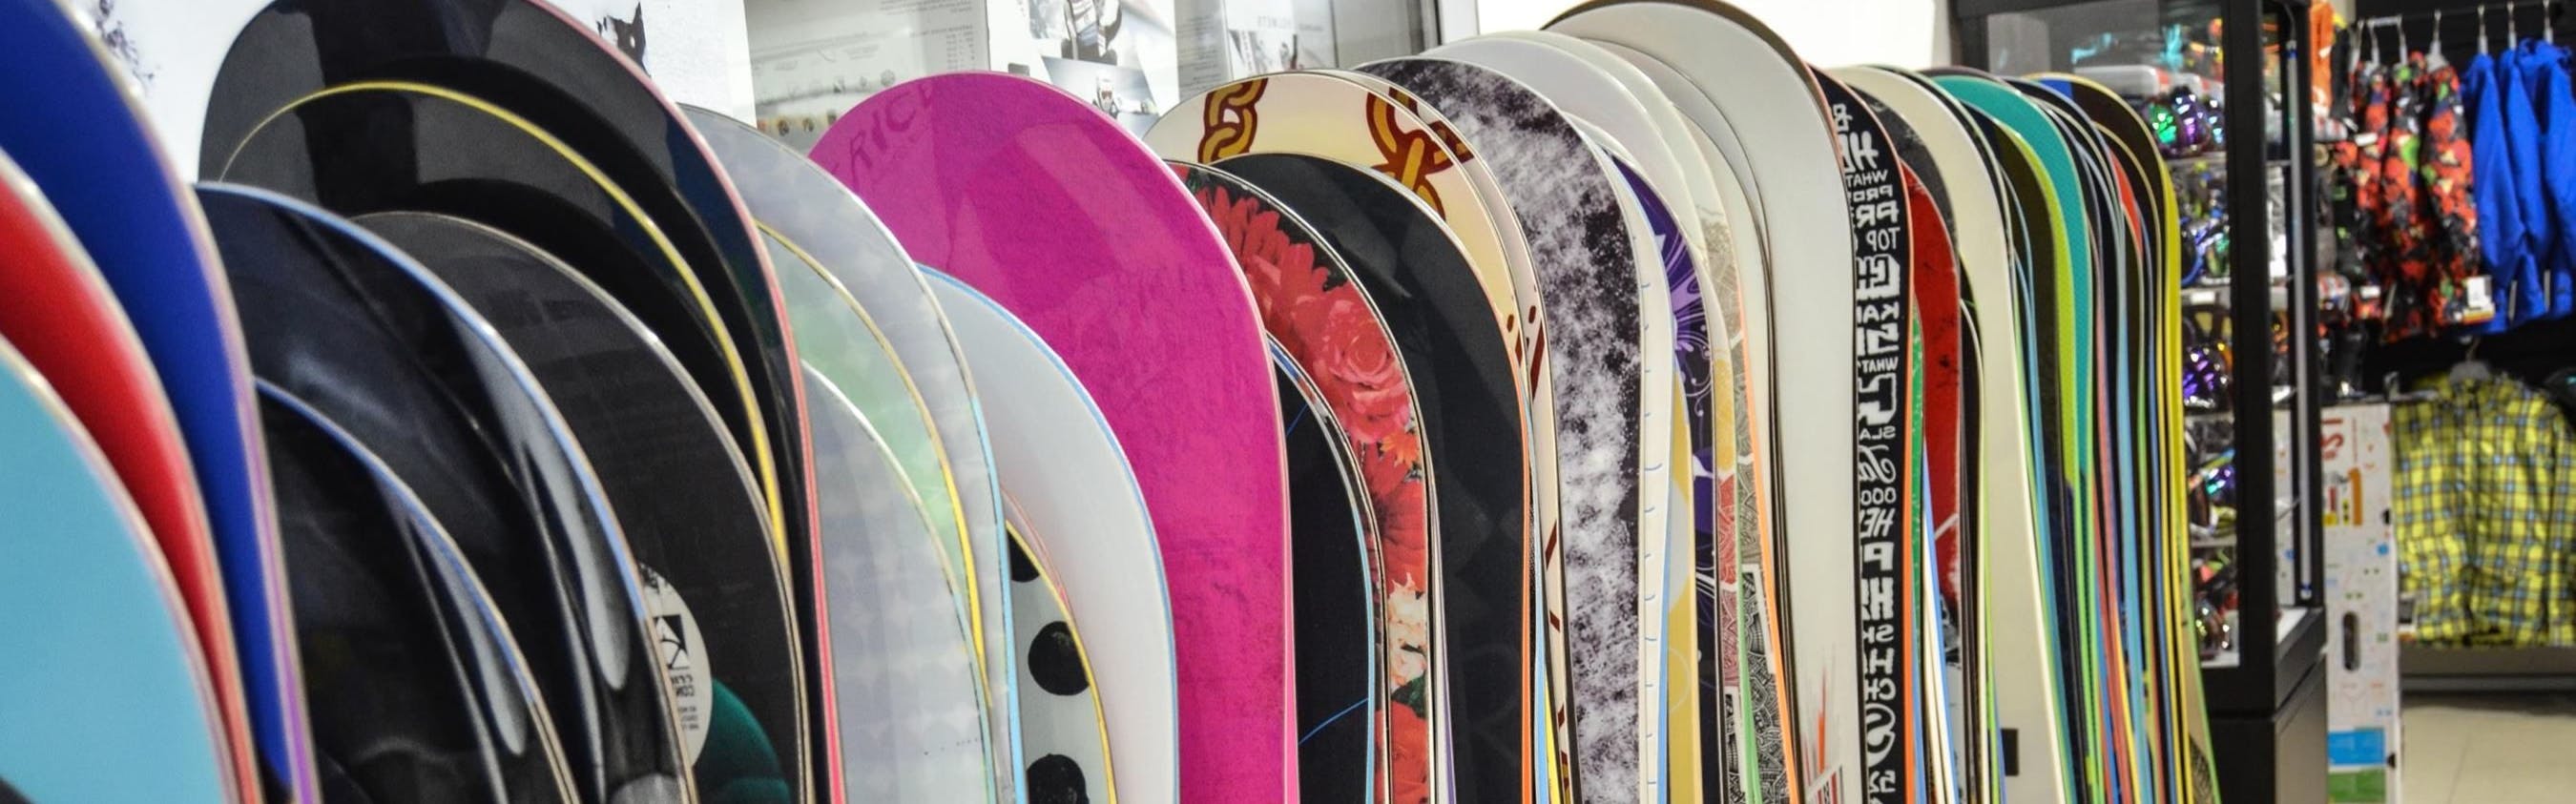 Snowboards in a line at a snowboard shop. 